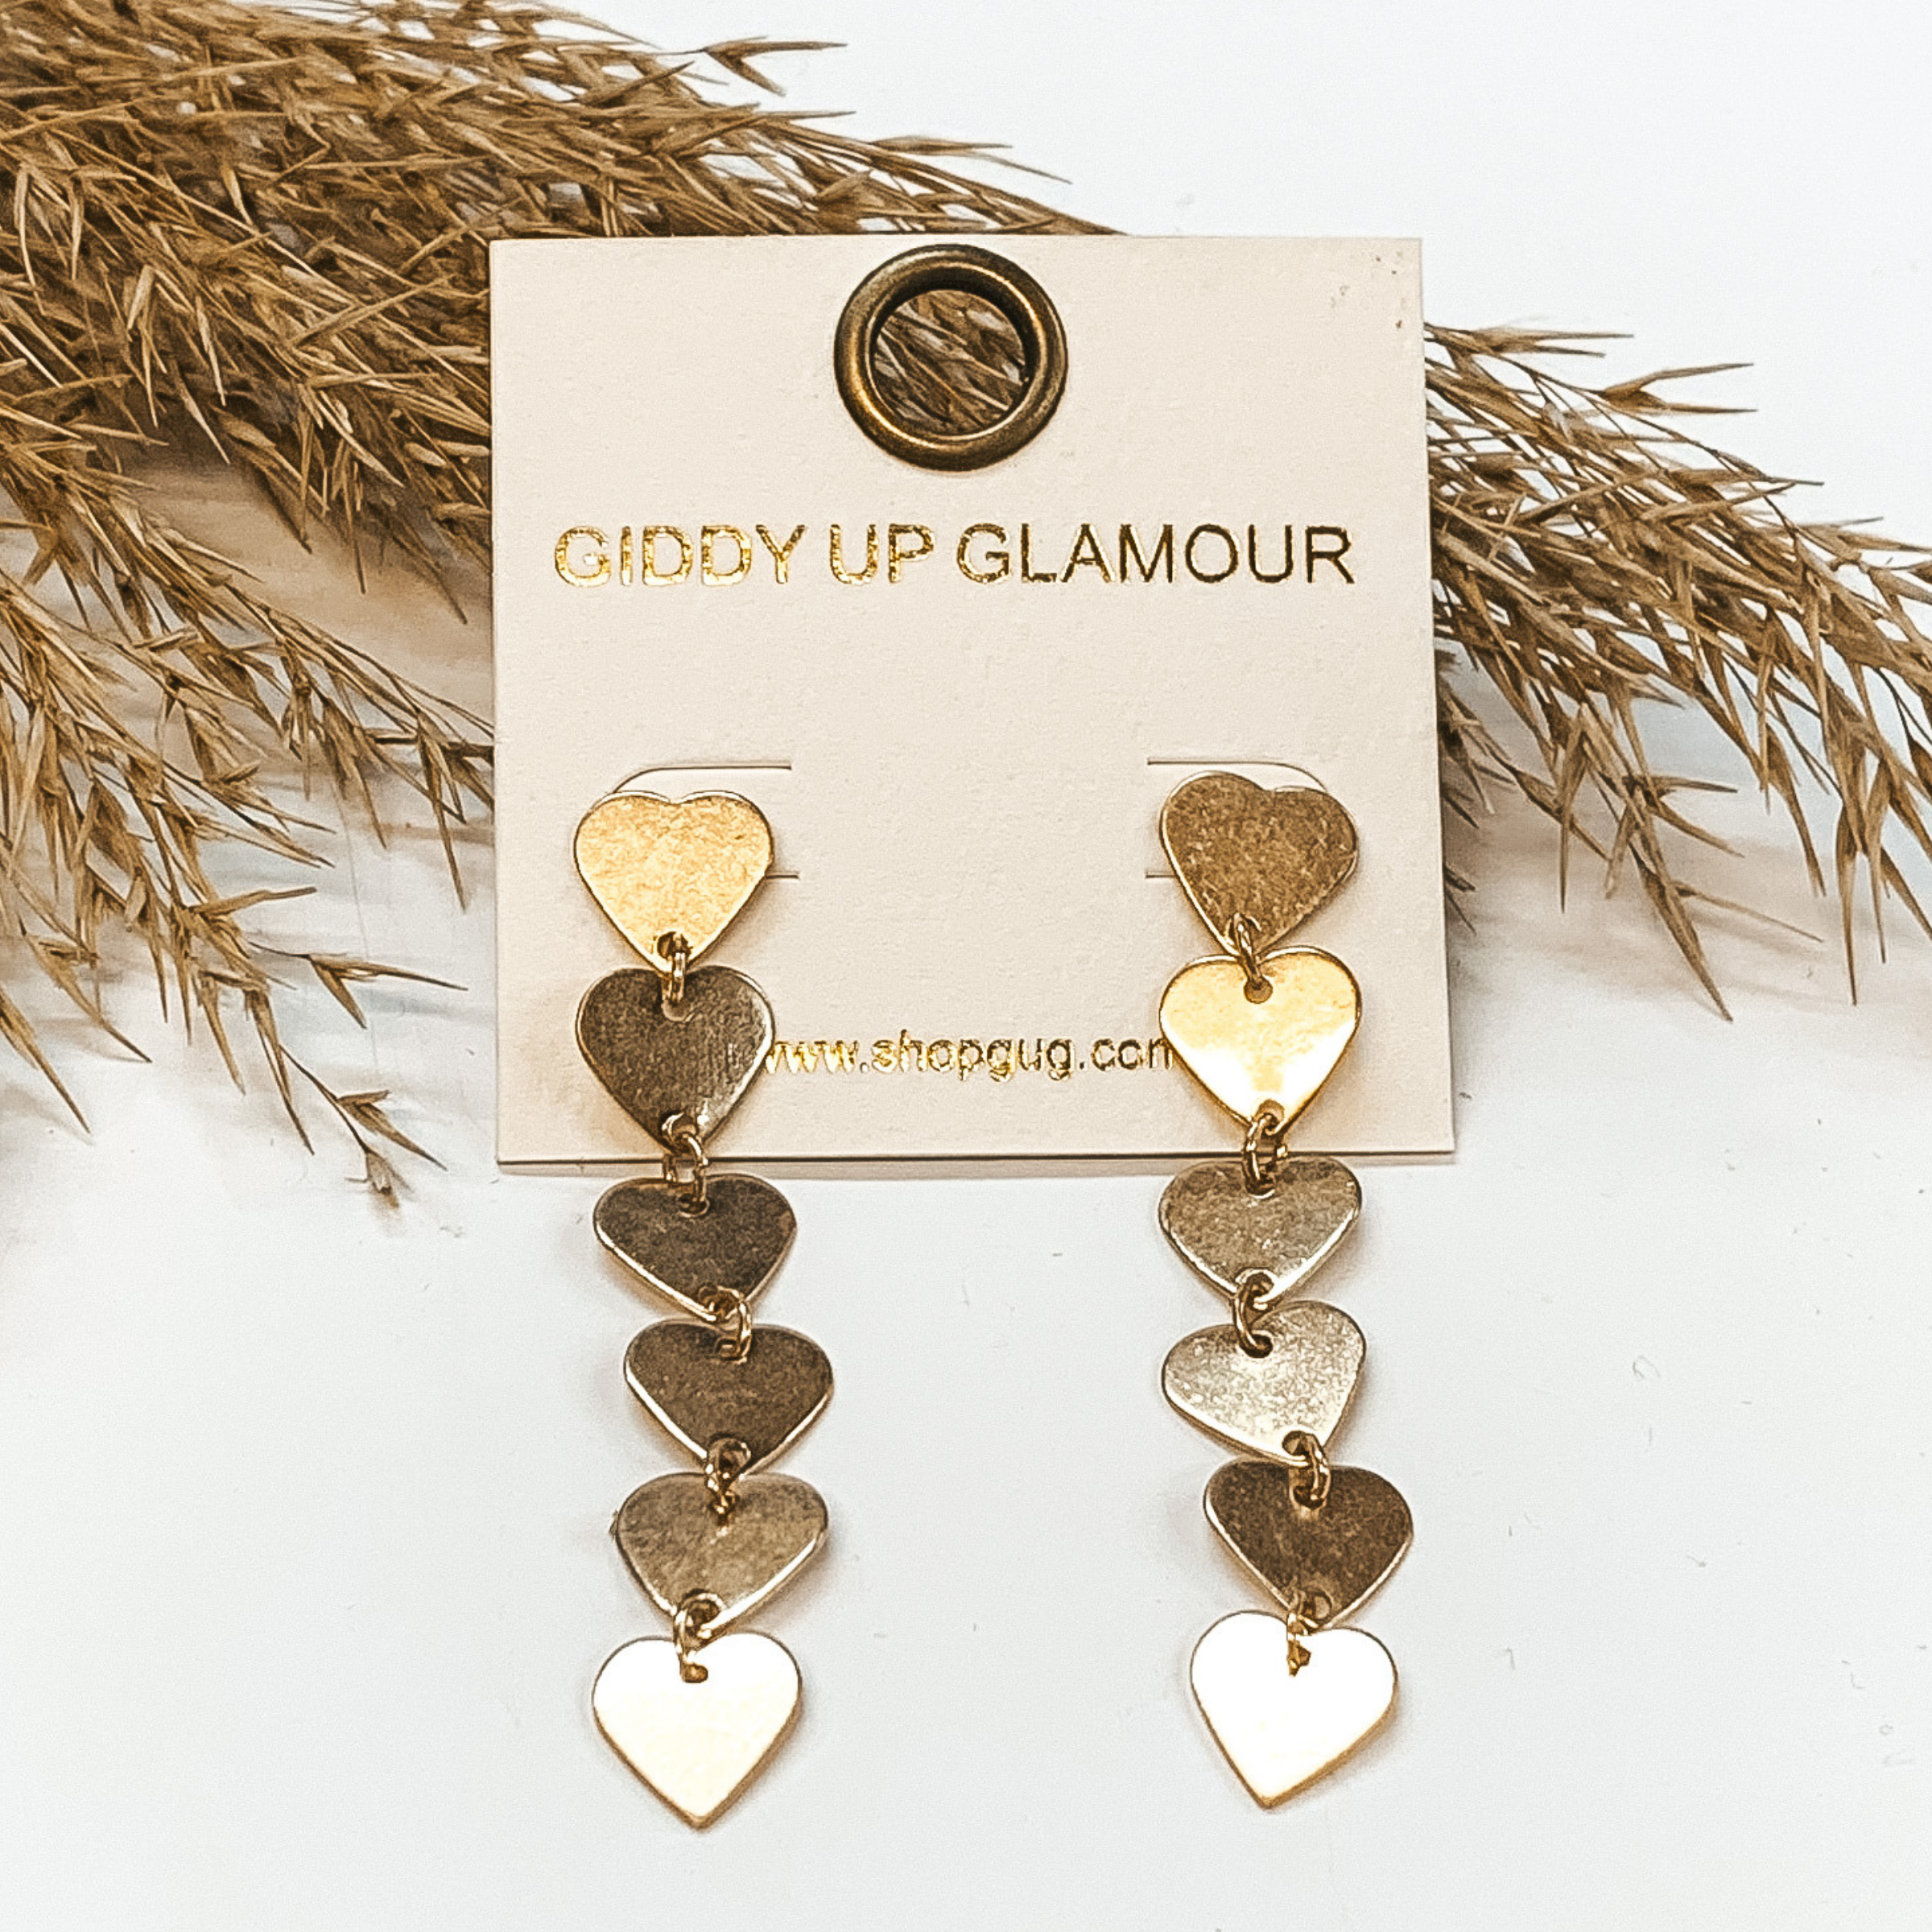 Drop earrings with six gold hearts on each earring. These earrings are pictured on a white background with a a brown plant in the back as decor.